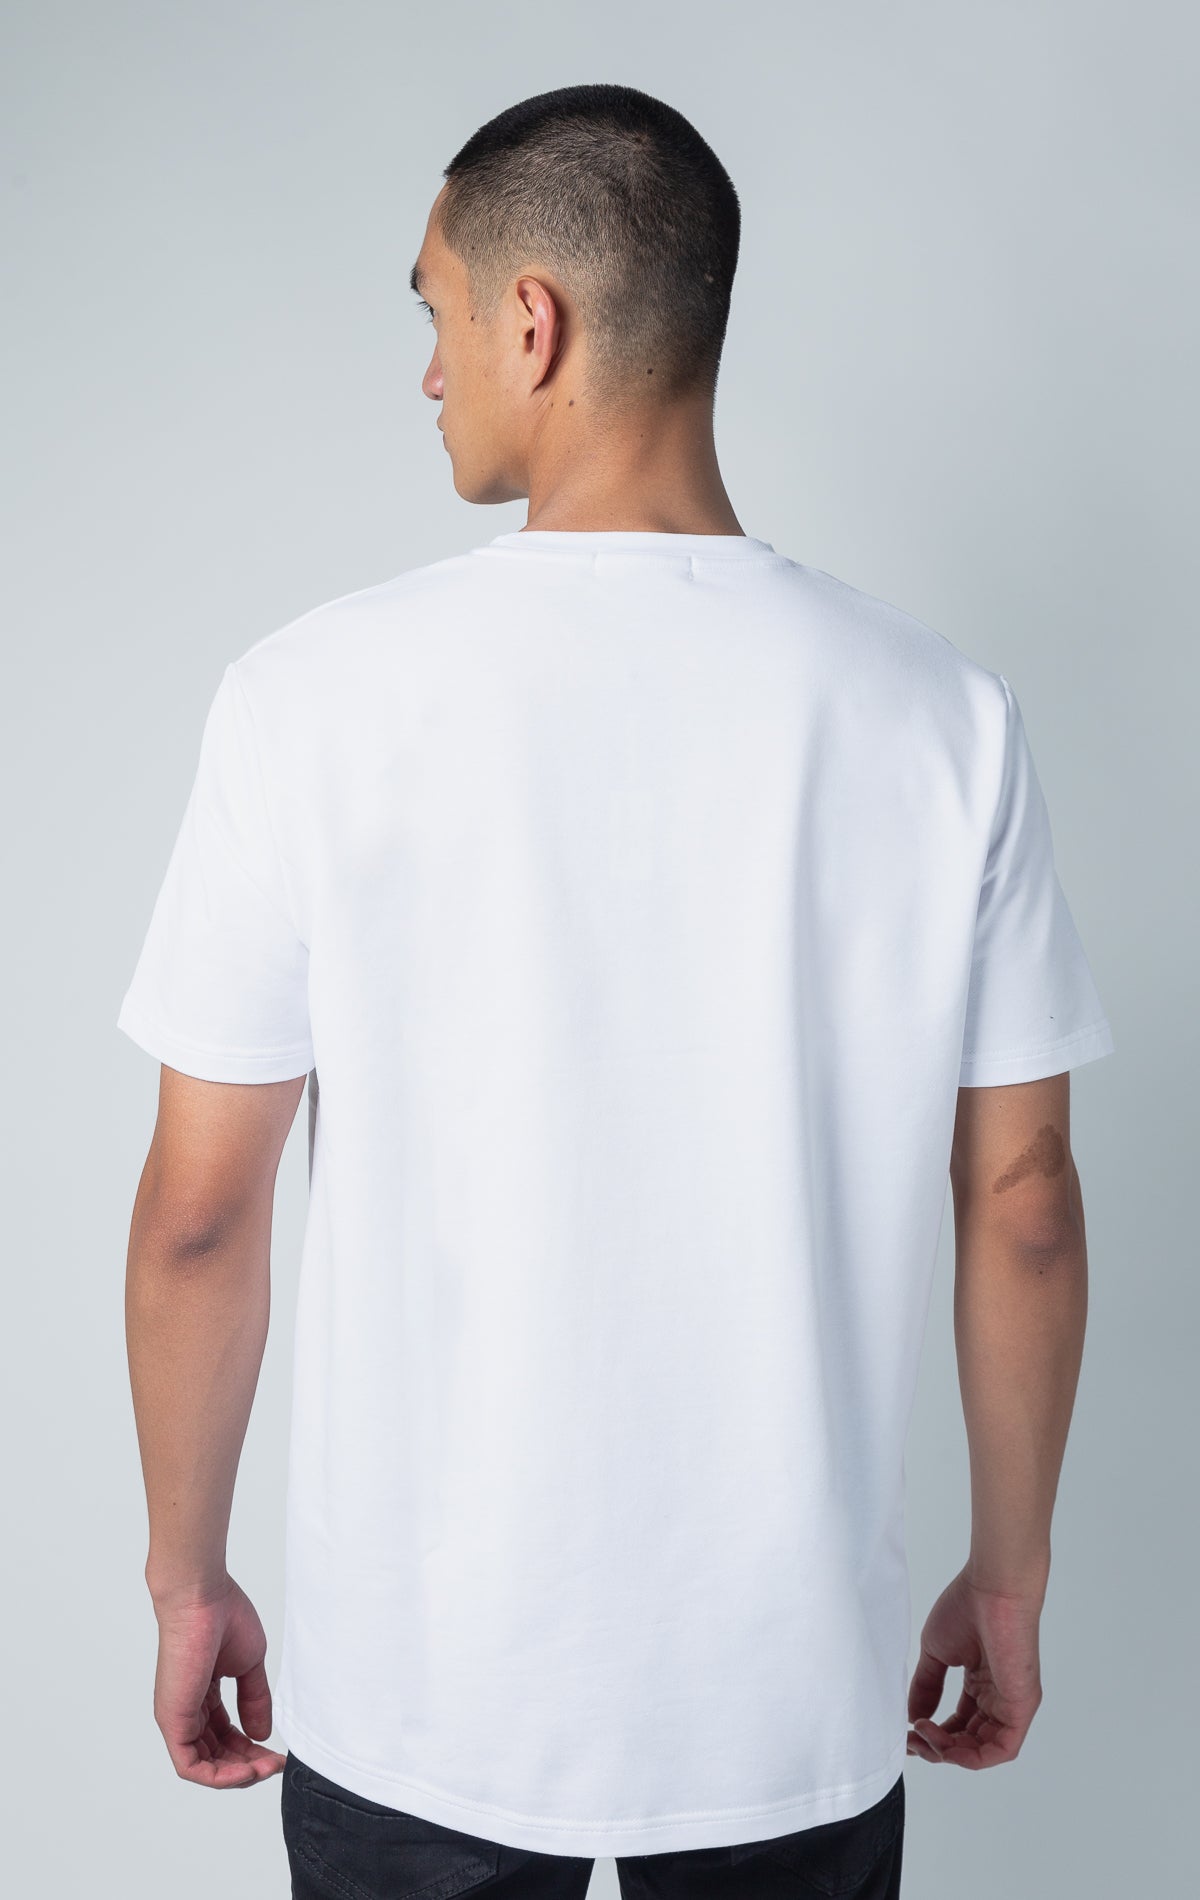 White Billy short sleeve, crewneck collar T-shirt with goat graphic